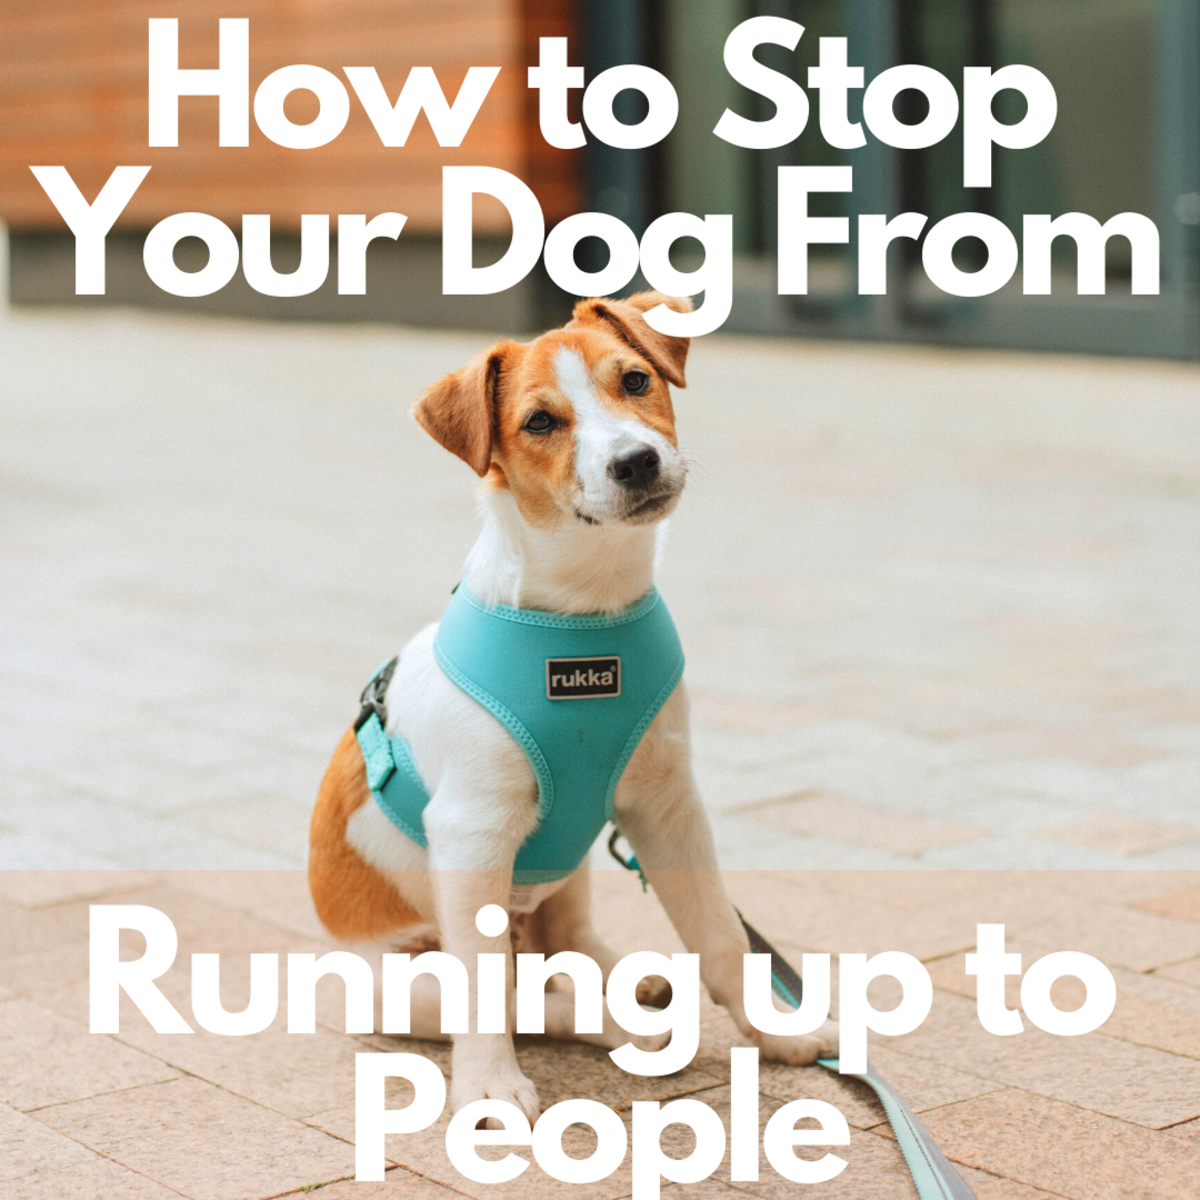 How Can I Stop My Dog From Approaching People? - PetHelpful